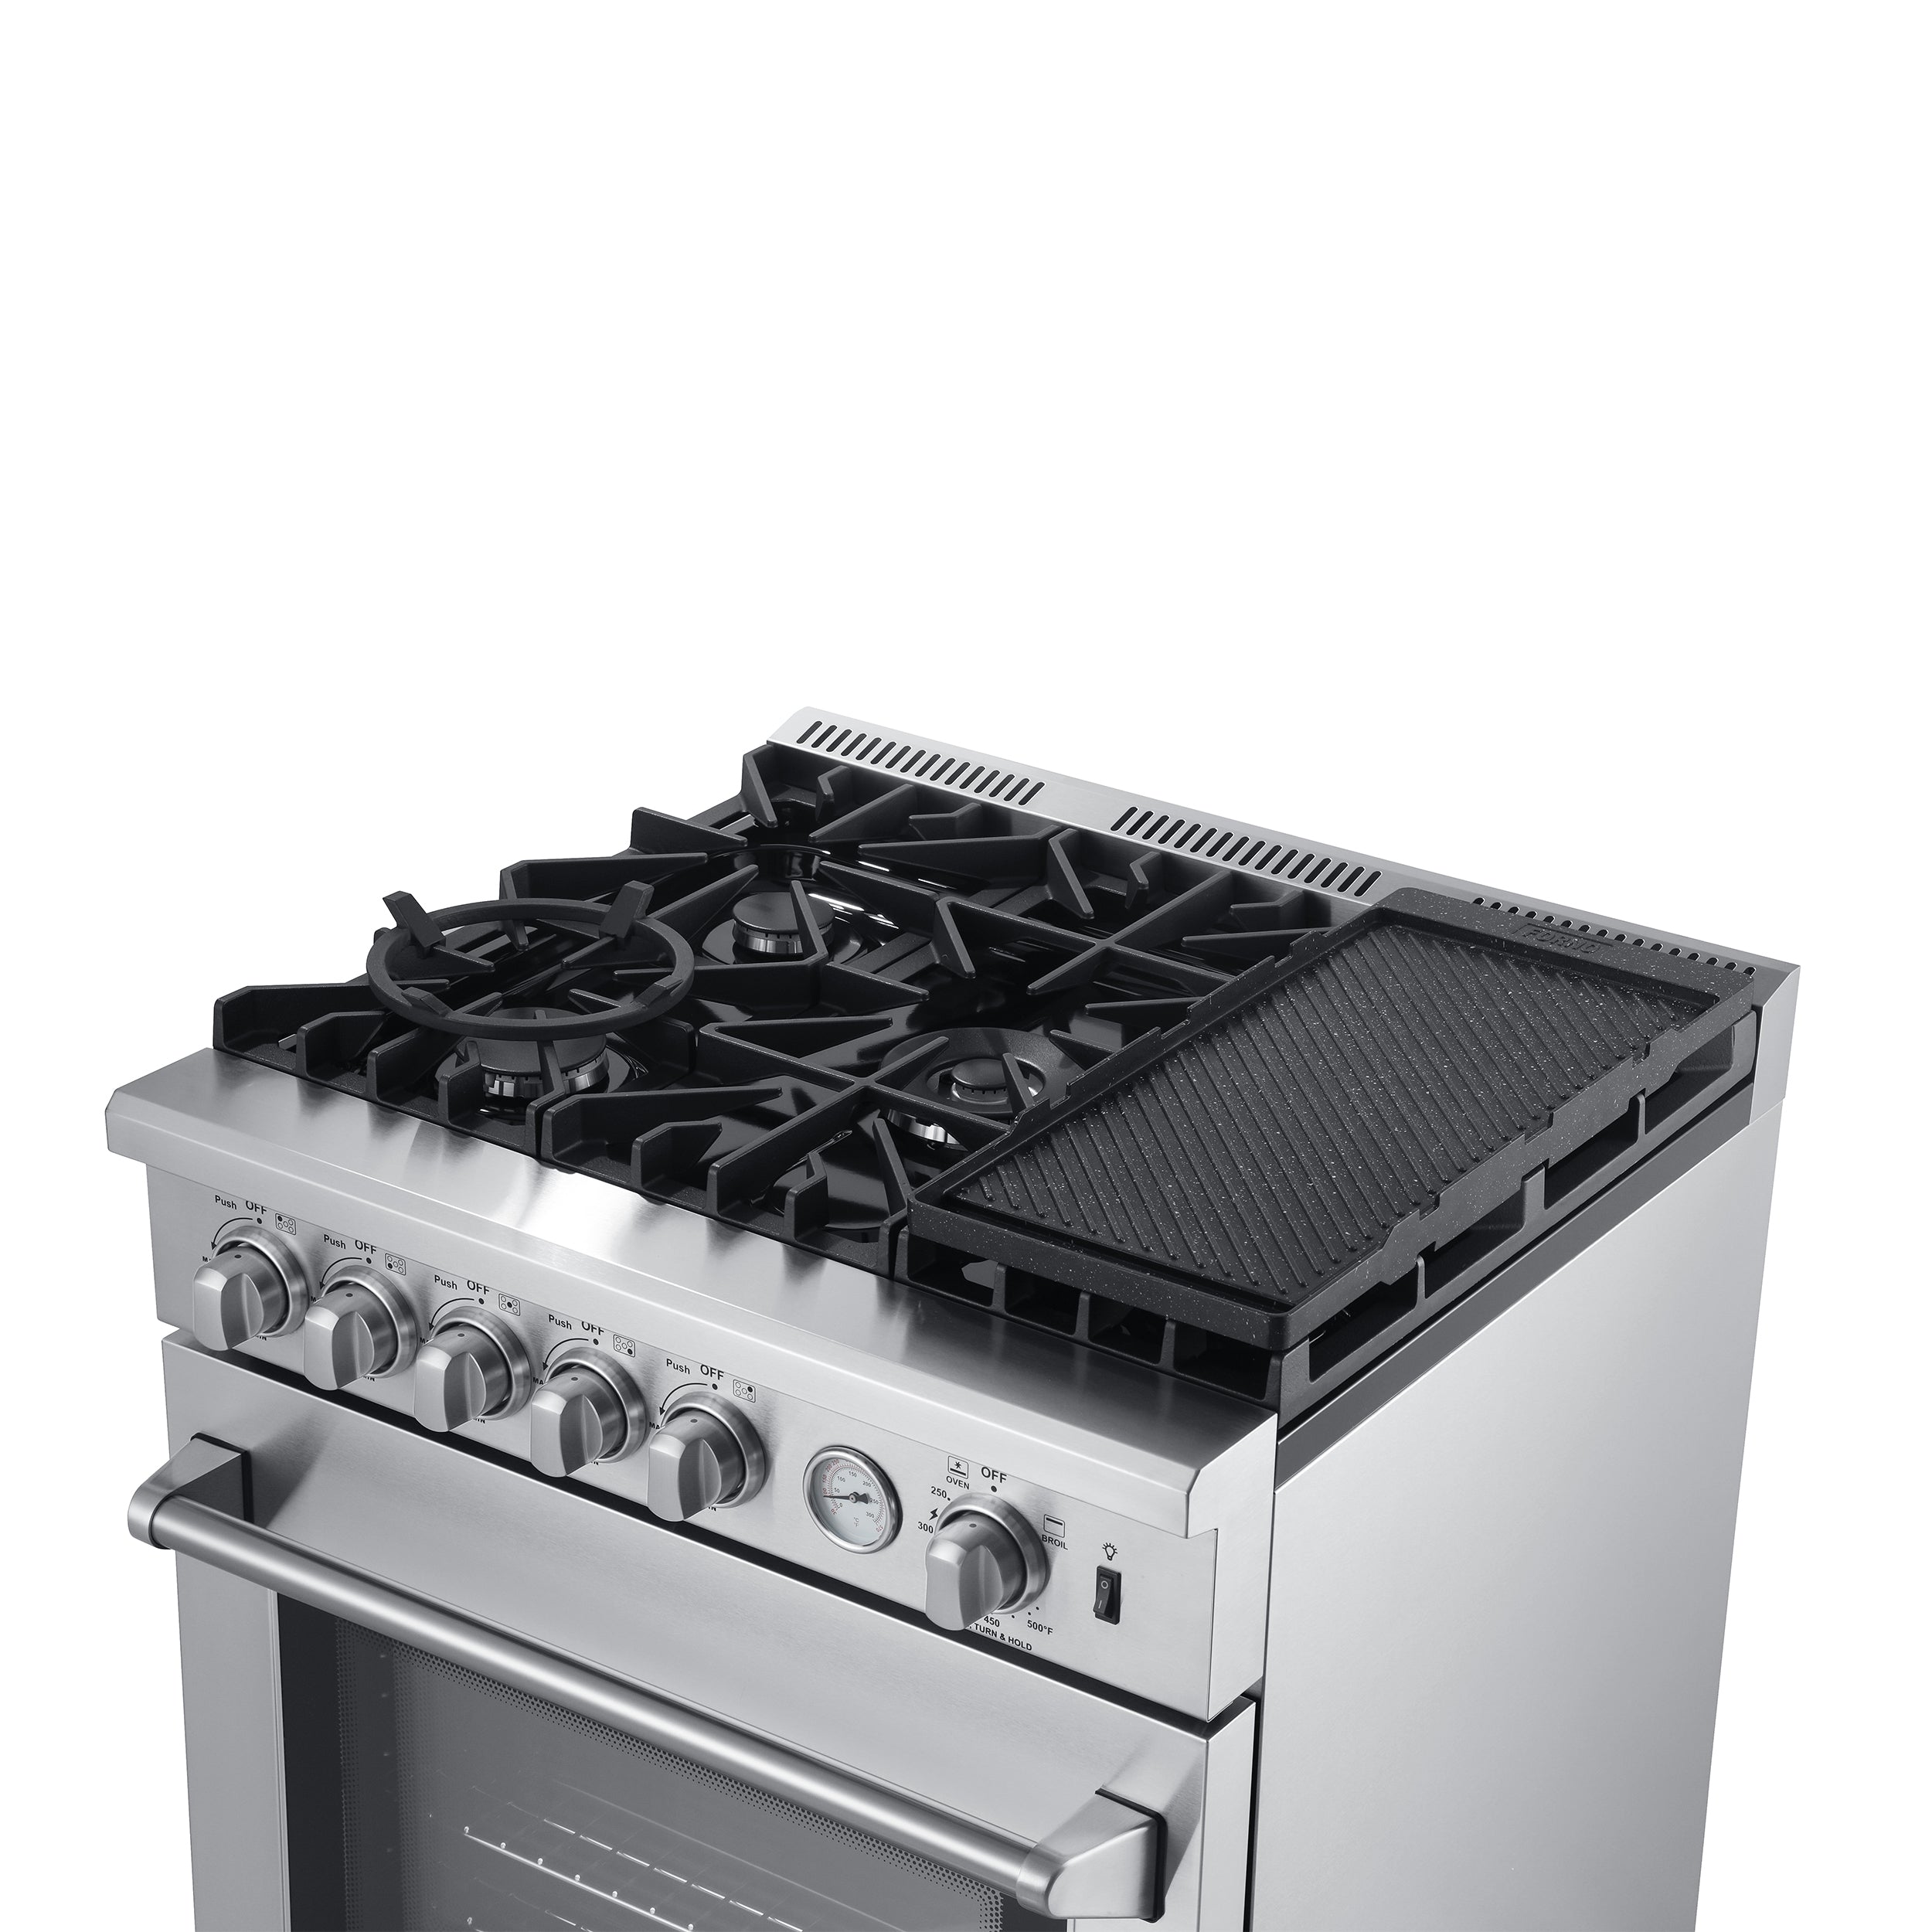 The Forno Lazio 30 in. Range Cooktop has 5 sealed burners with a total stovetop output of 70,000 BTU.